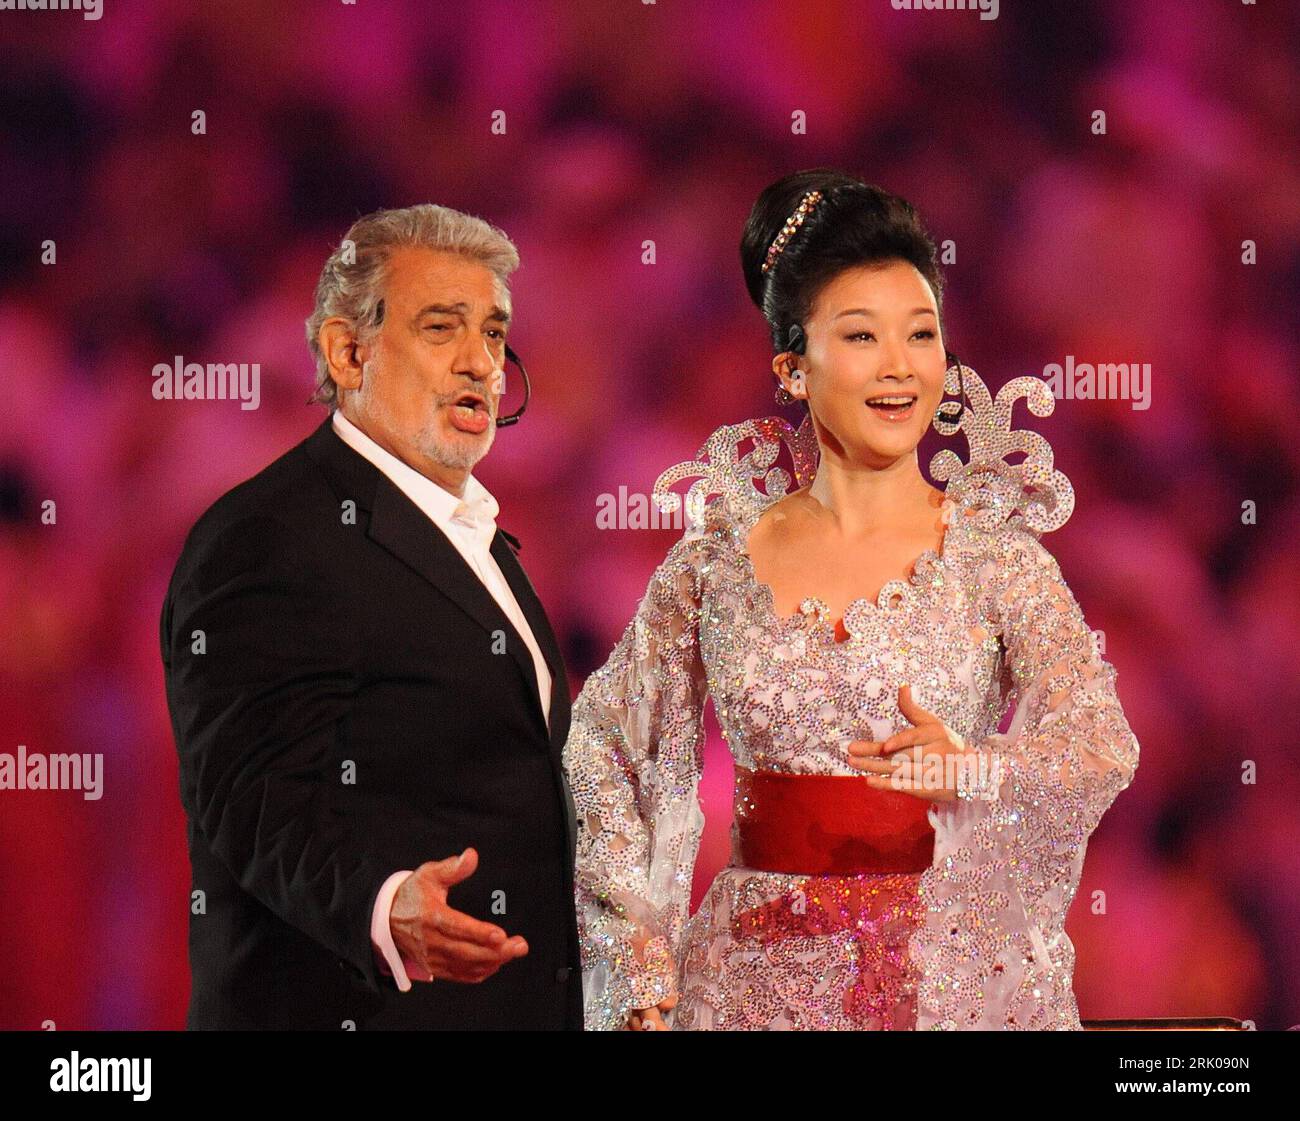 Placido domingo hi-res photography stock and Page Alamy - - 13 images